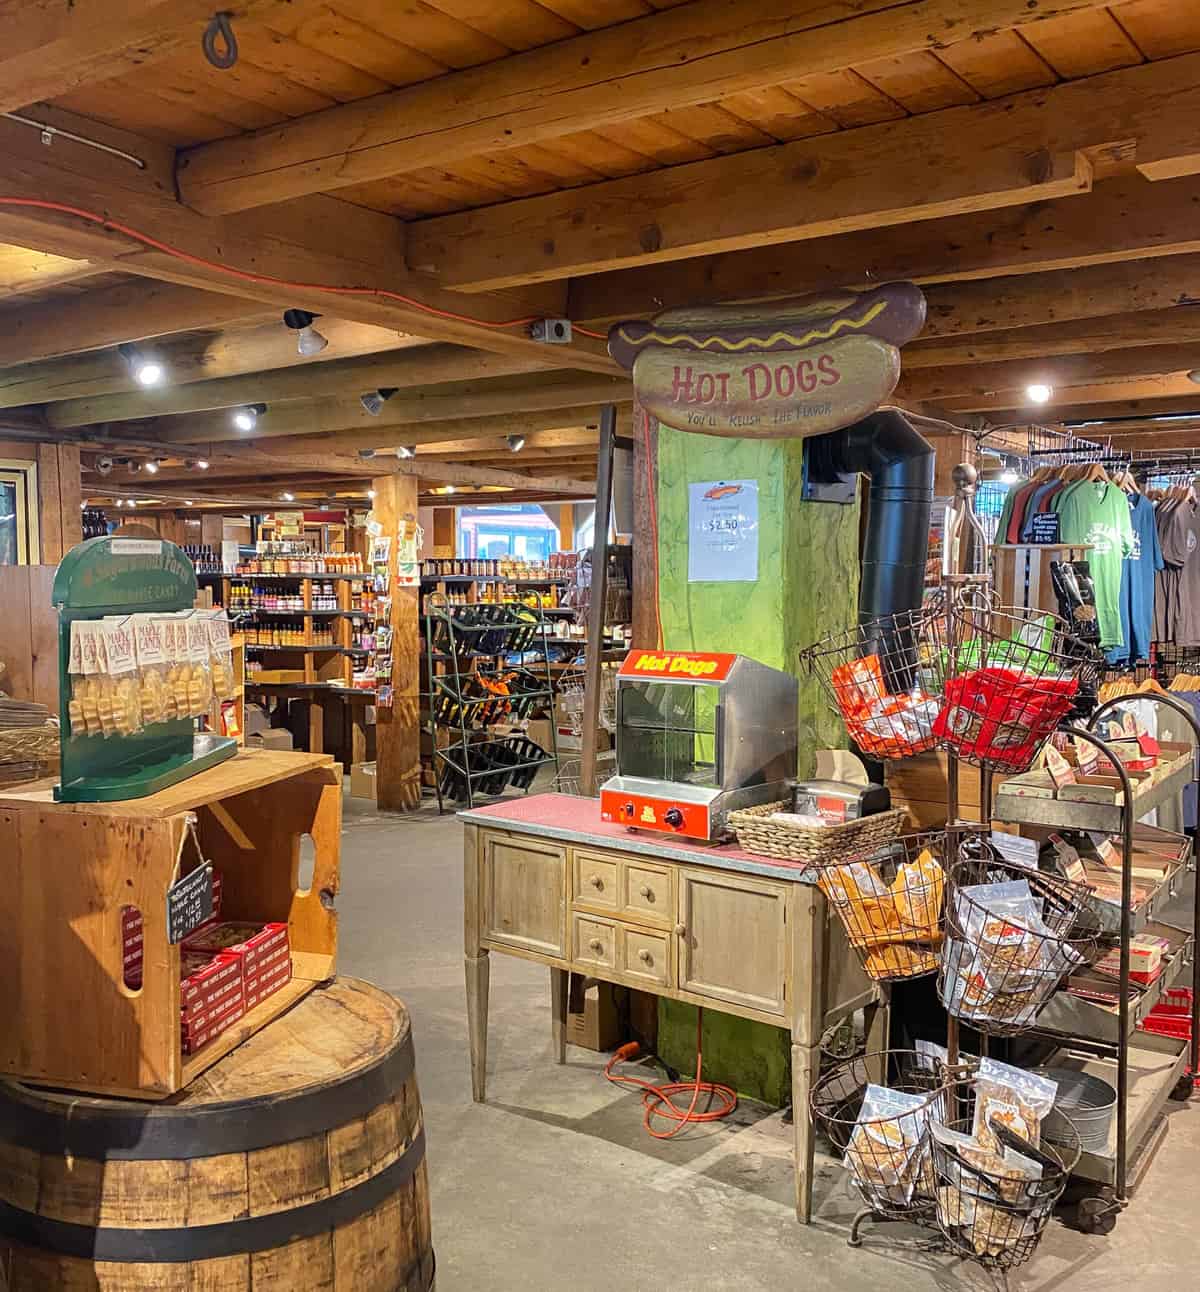 Interior of country store with shelves of goods.